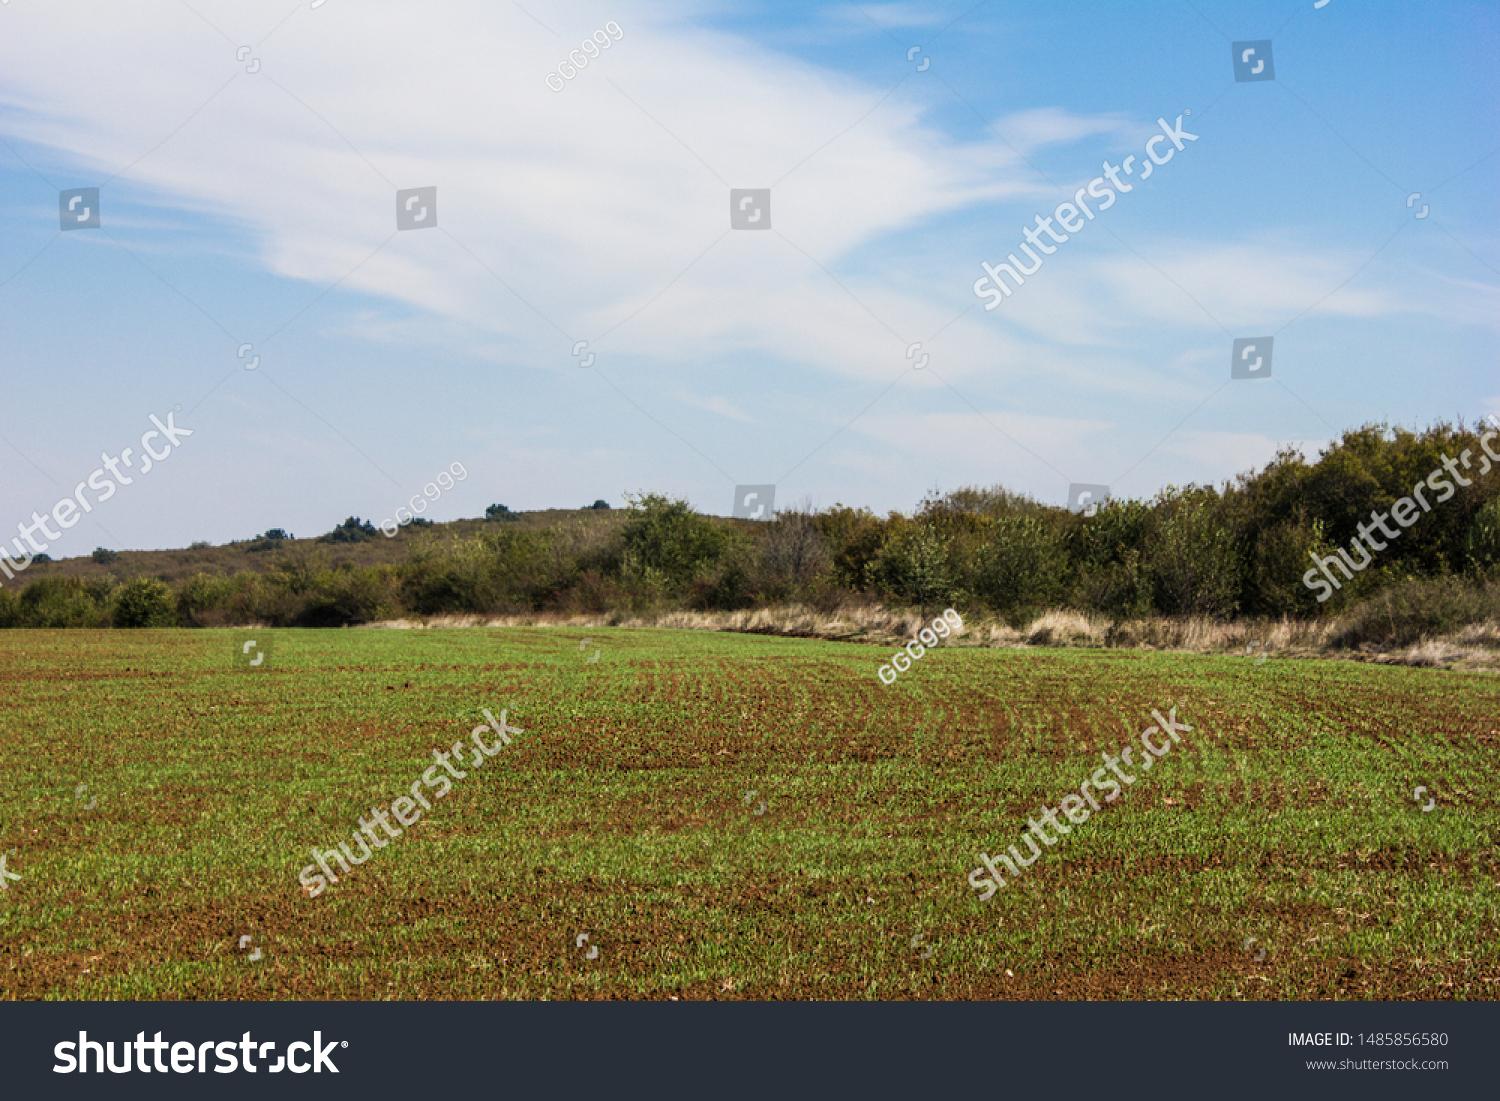 Furrows row pattern in a plowed field prepared for planting crops in spring. Growing wheat crop in springtime. Horizontal view in perspective with cloud and blue sky background #1485856580